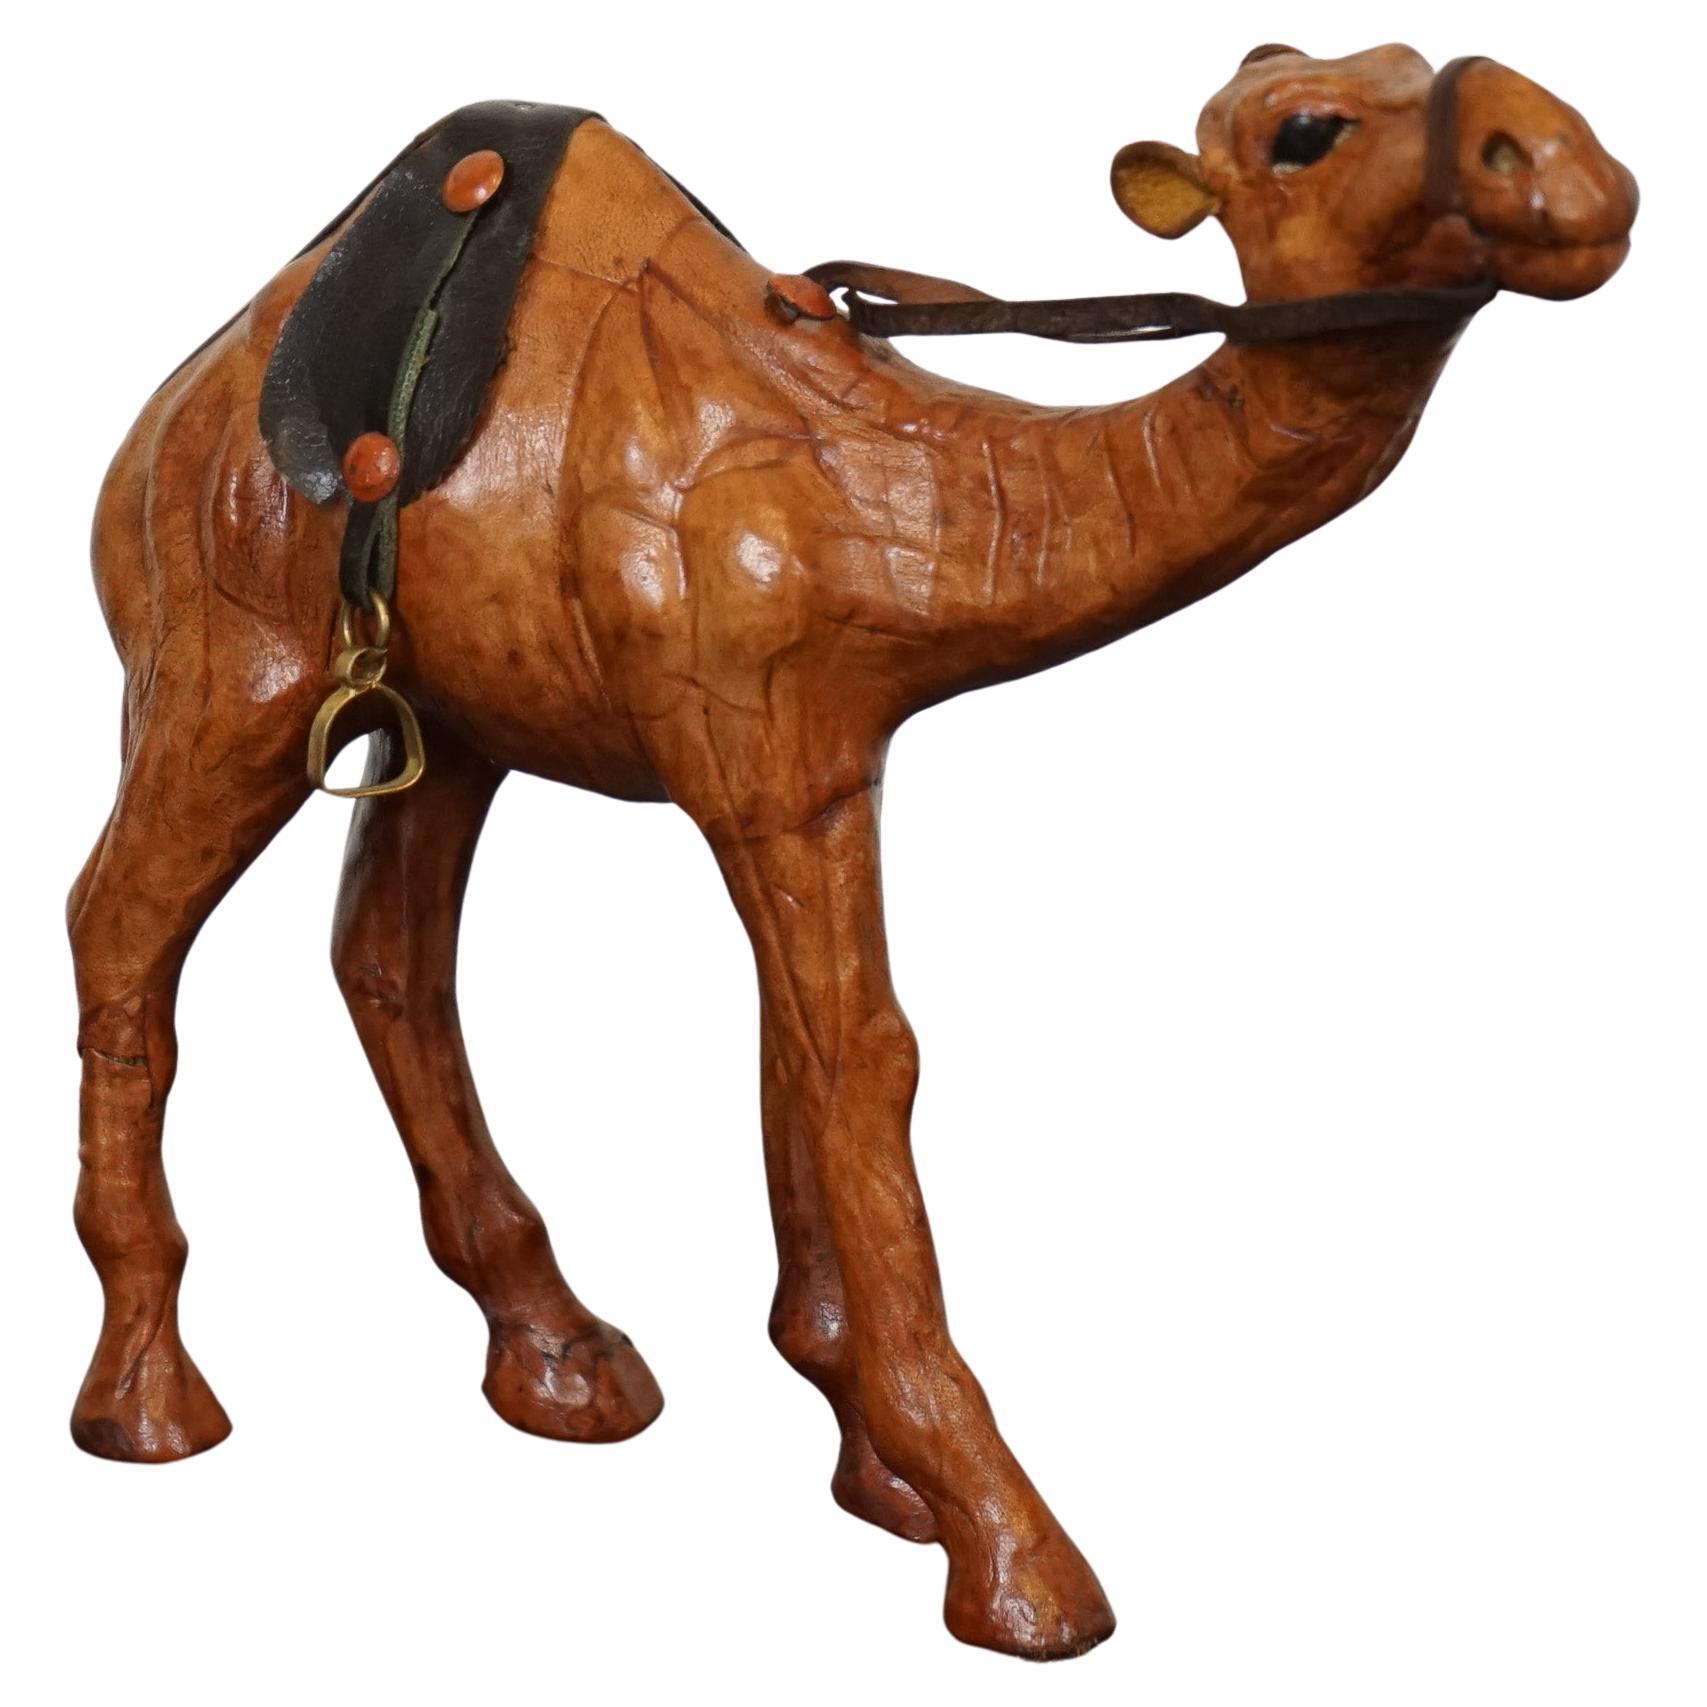 LIBERTY'S LONDON CAMEL SCULPTURE WiTH LOVELY AGED LEATHER ON HAND CARVED WOOD 